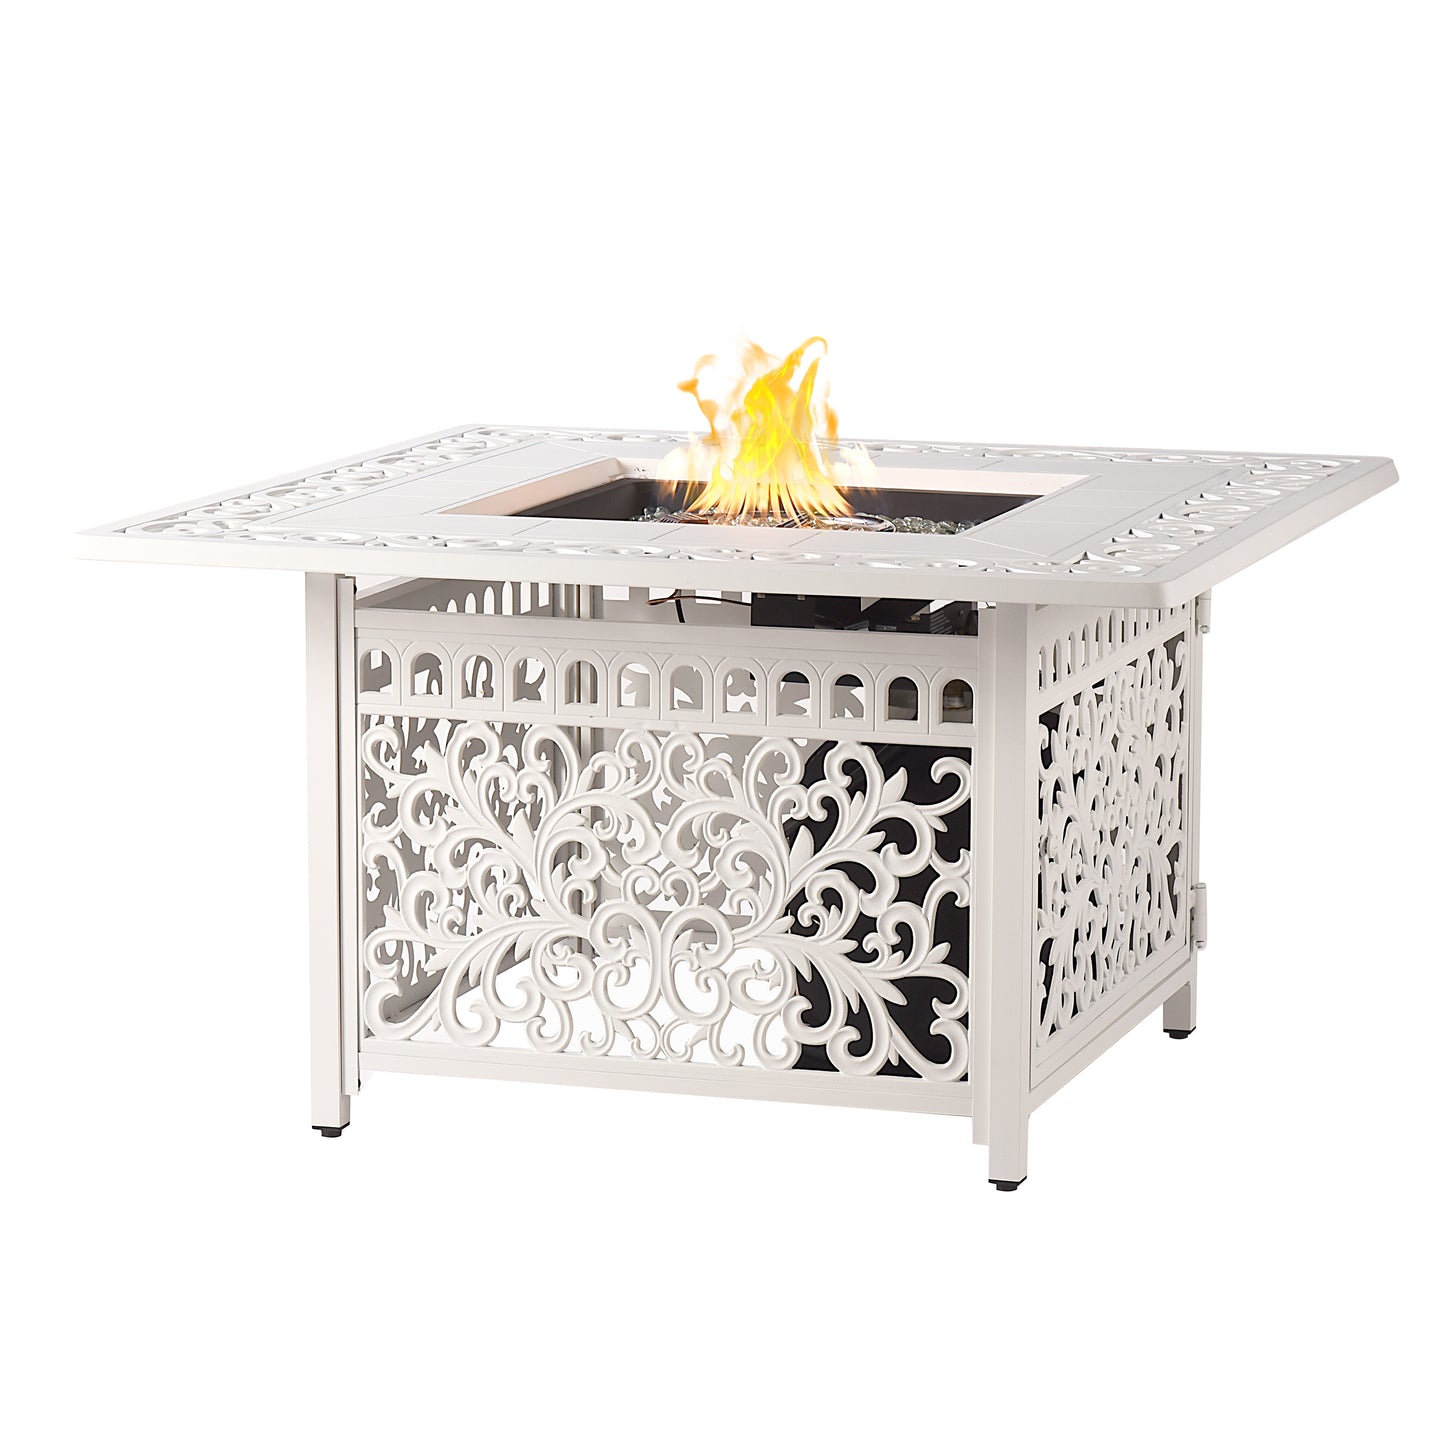 Aluminum 42-in Square Propane Fire Table with Beads, Covers and Lid